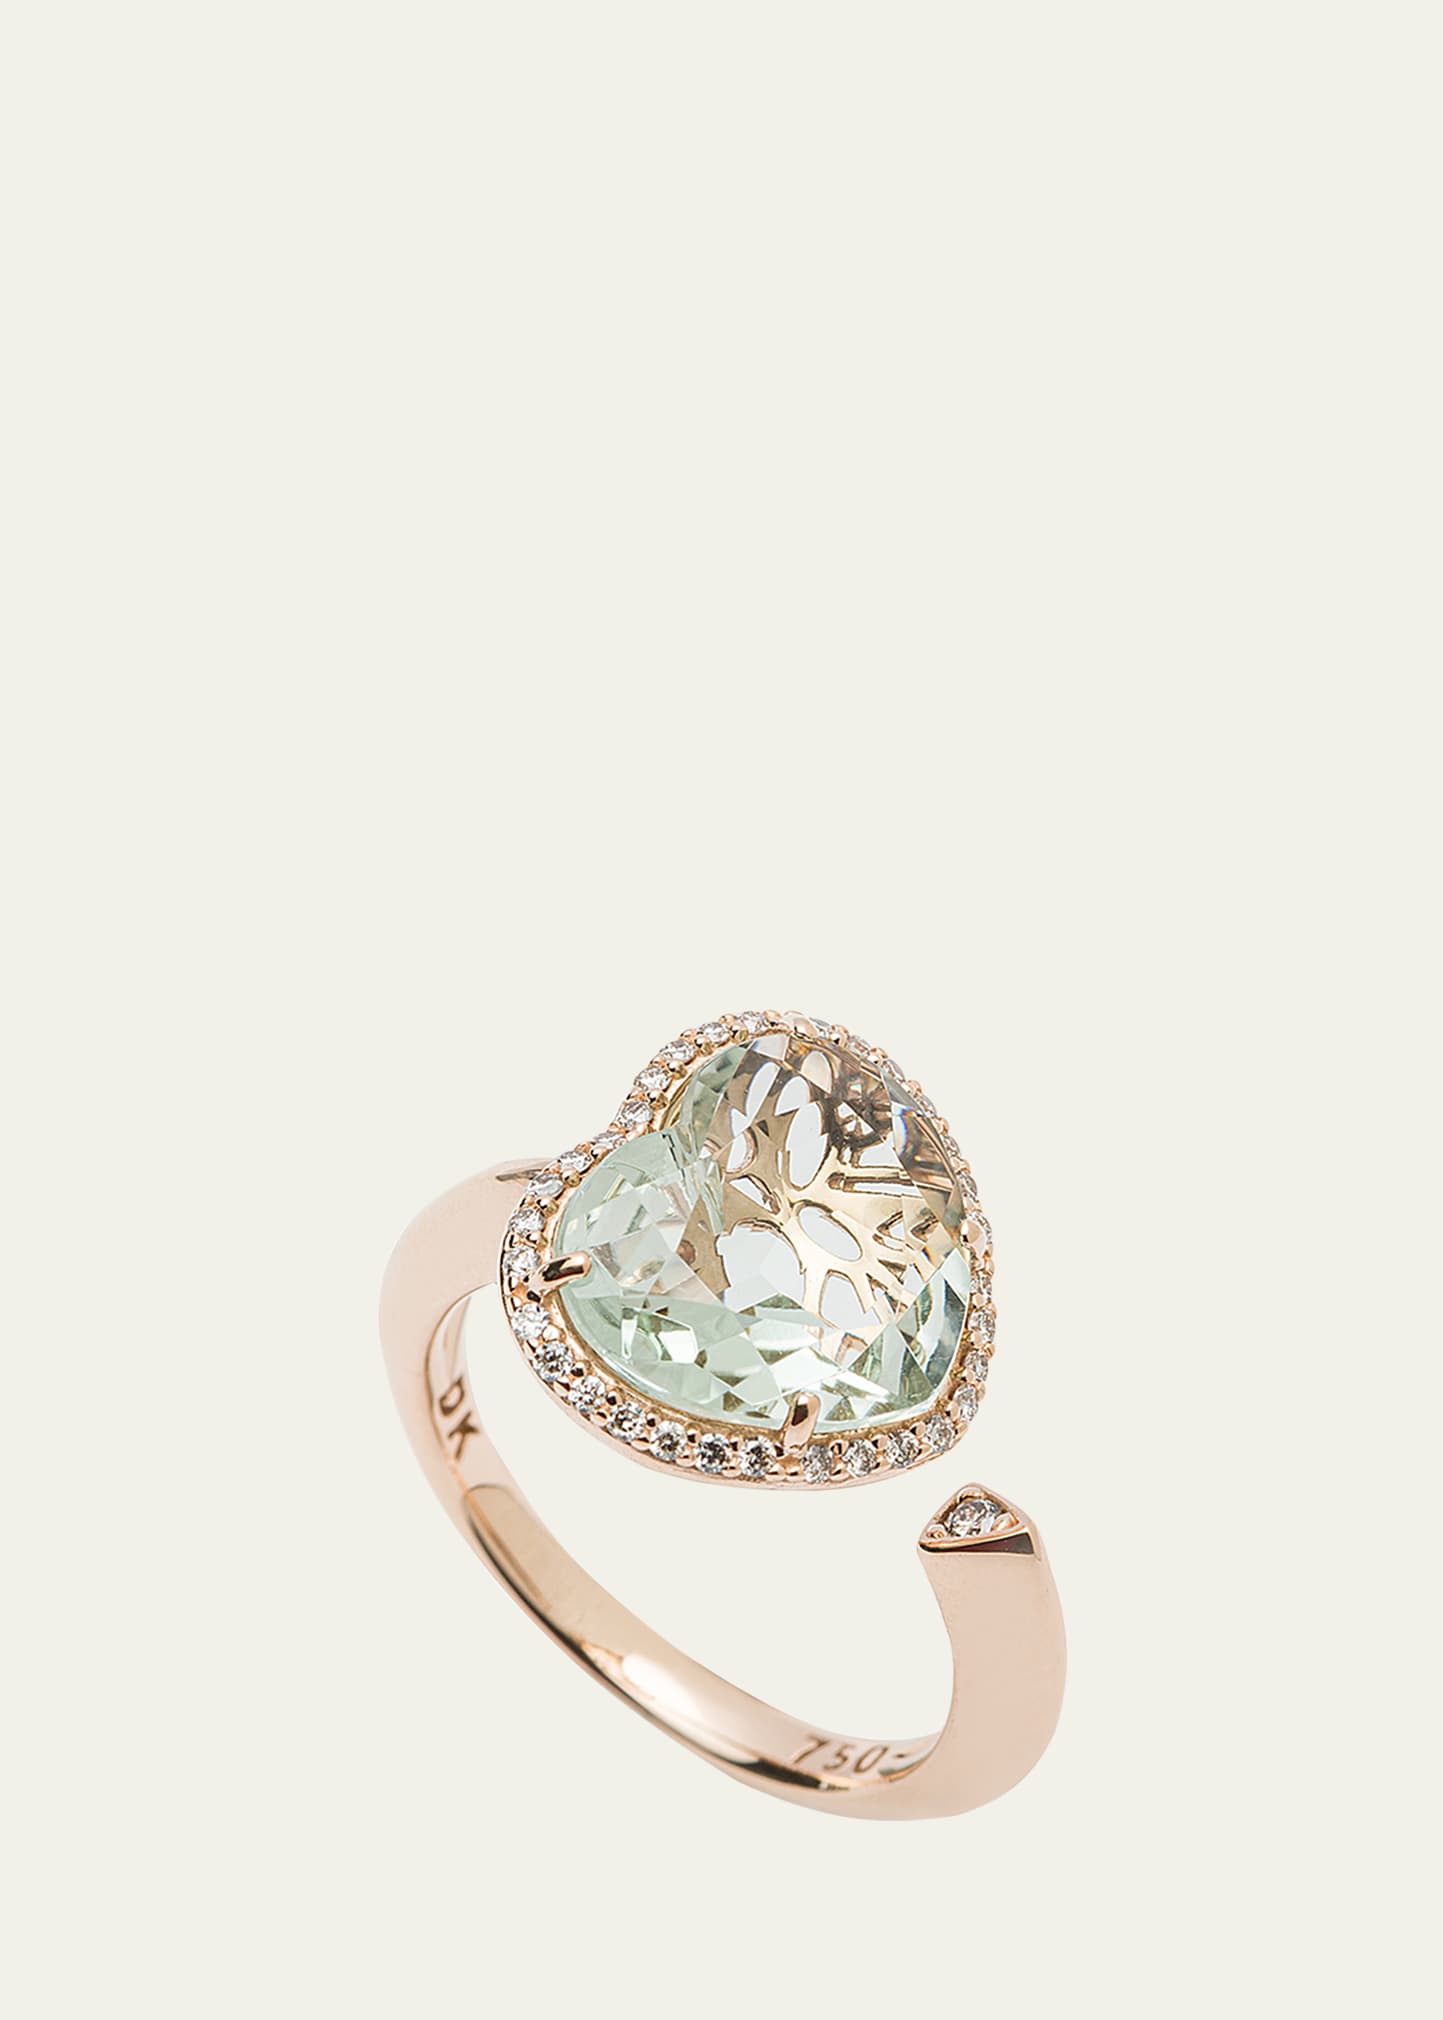 Daniella Kronfle 18k Rose Gold Heart Ring With Prasiolite And Diamonds